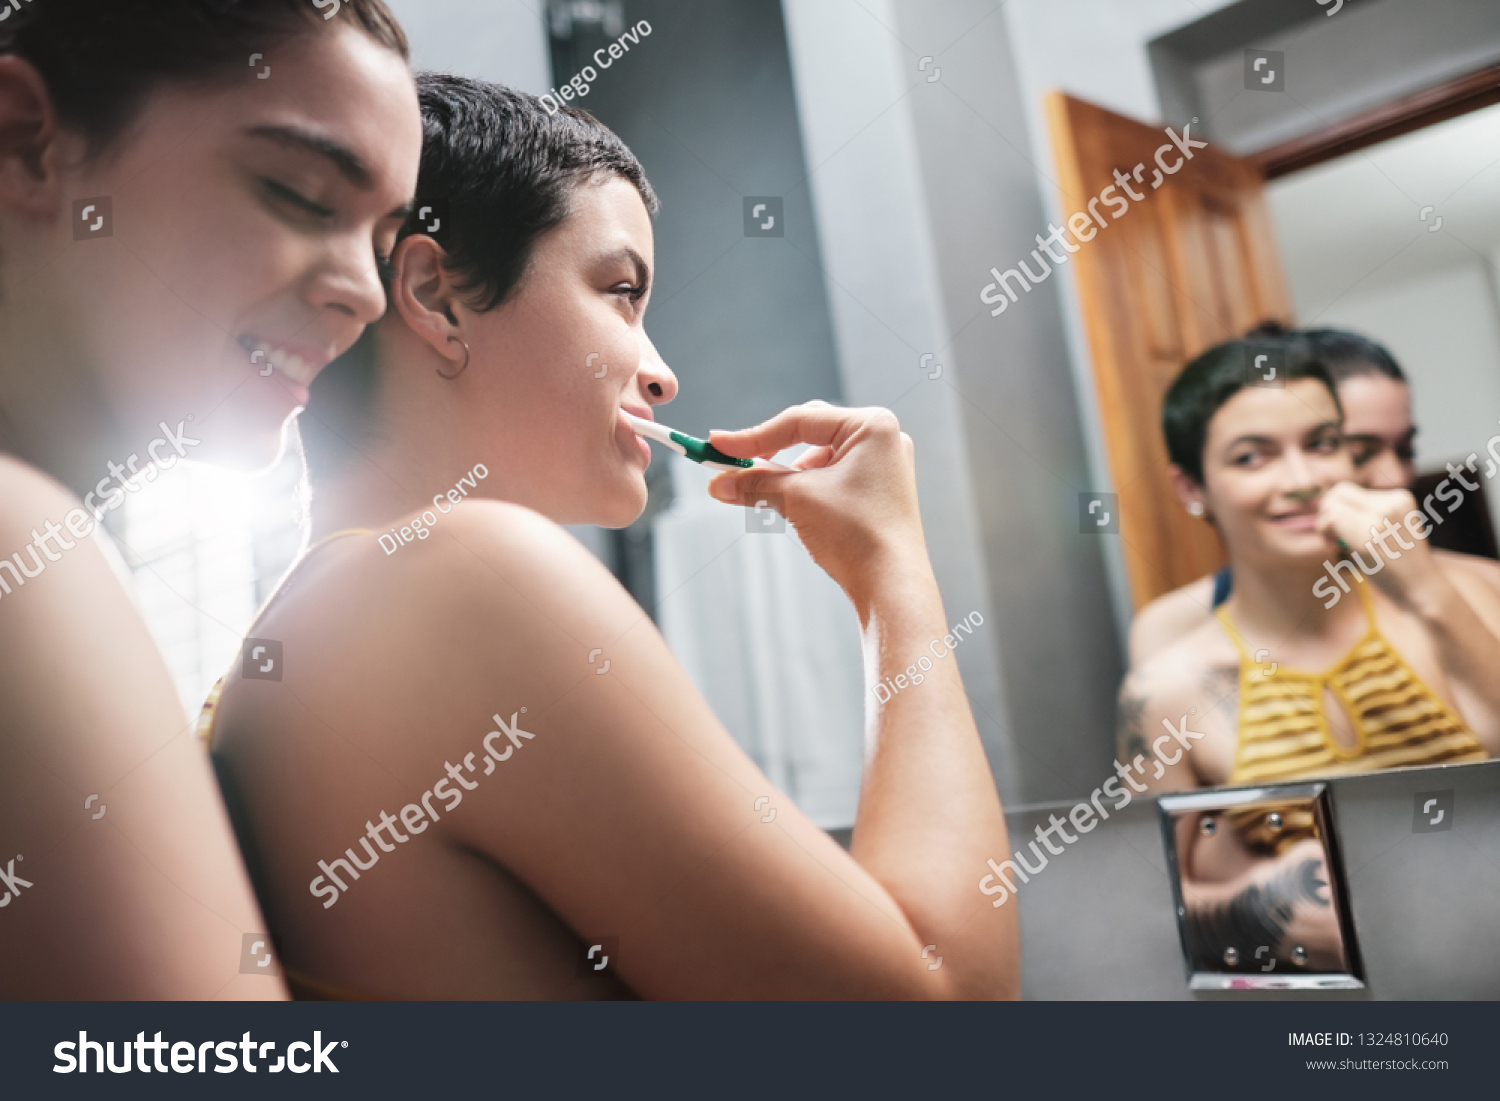 andrew ganas add young lesbians in shower photo